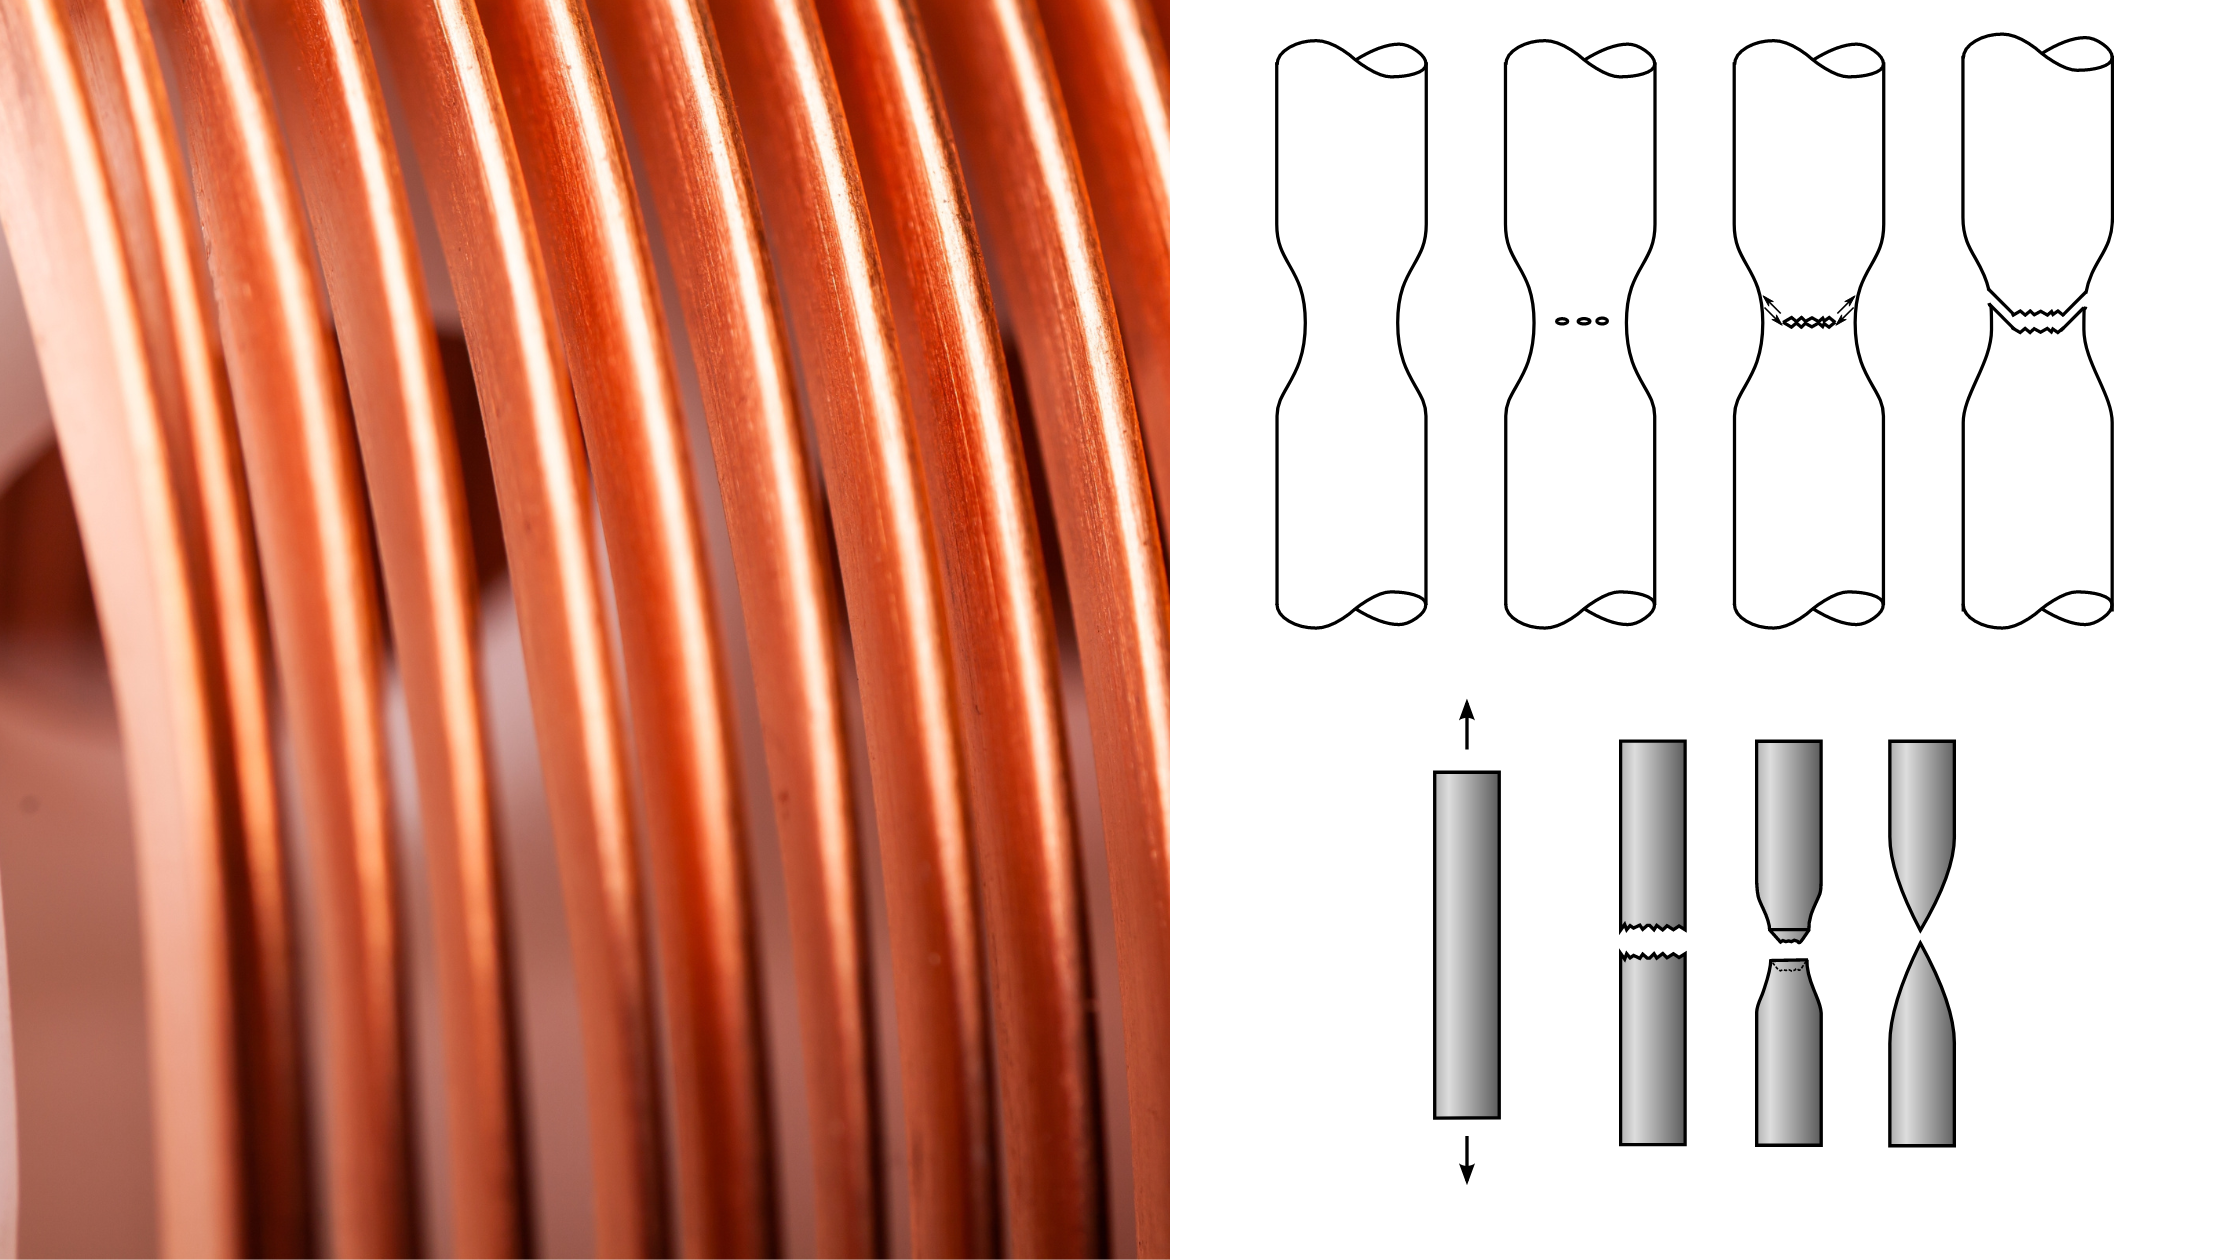 Copper wire round around a spool; graphic depictions of metal tensile test; a piece of metal being broken by being pulled by its end